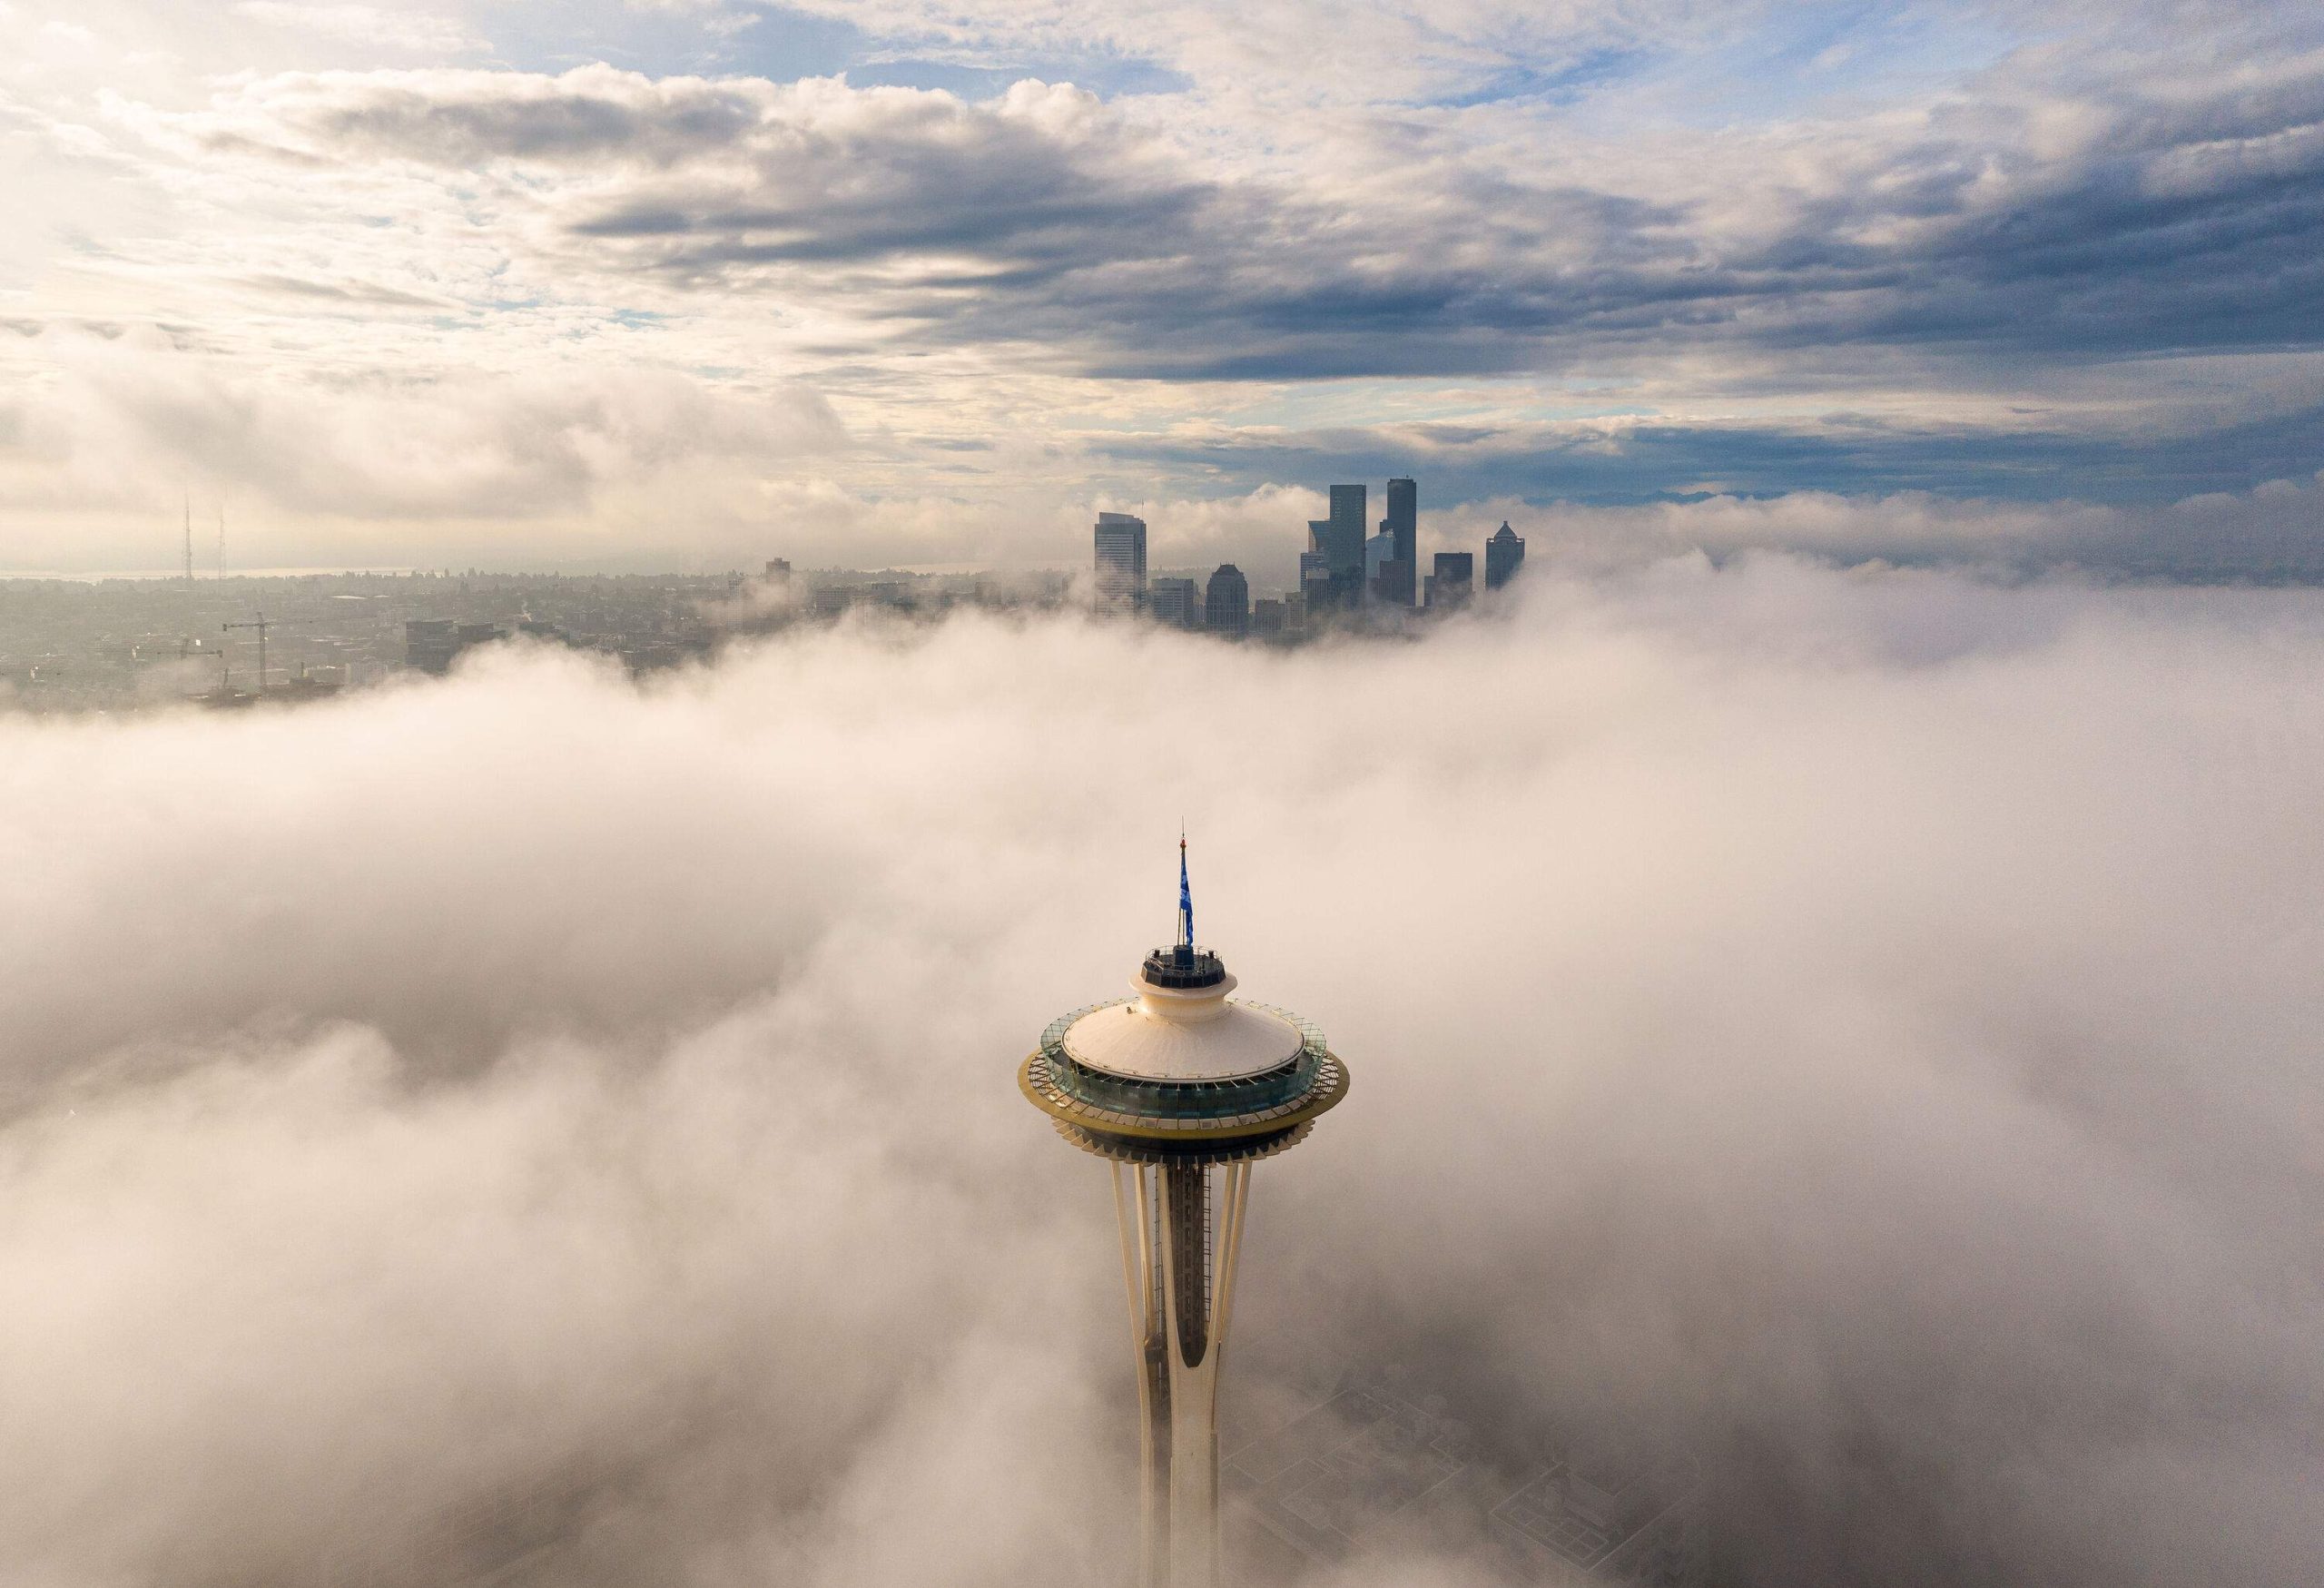 A tall observation tower jutting out on the clouds covering the land with a cluster of tall buildings in the distance.